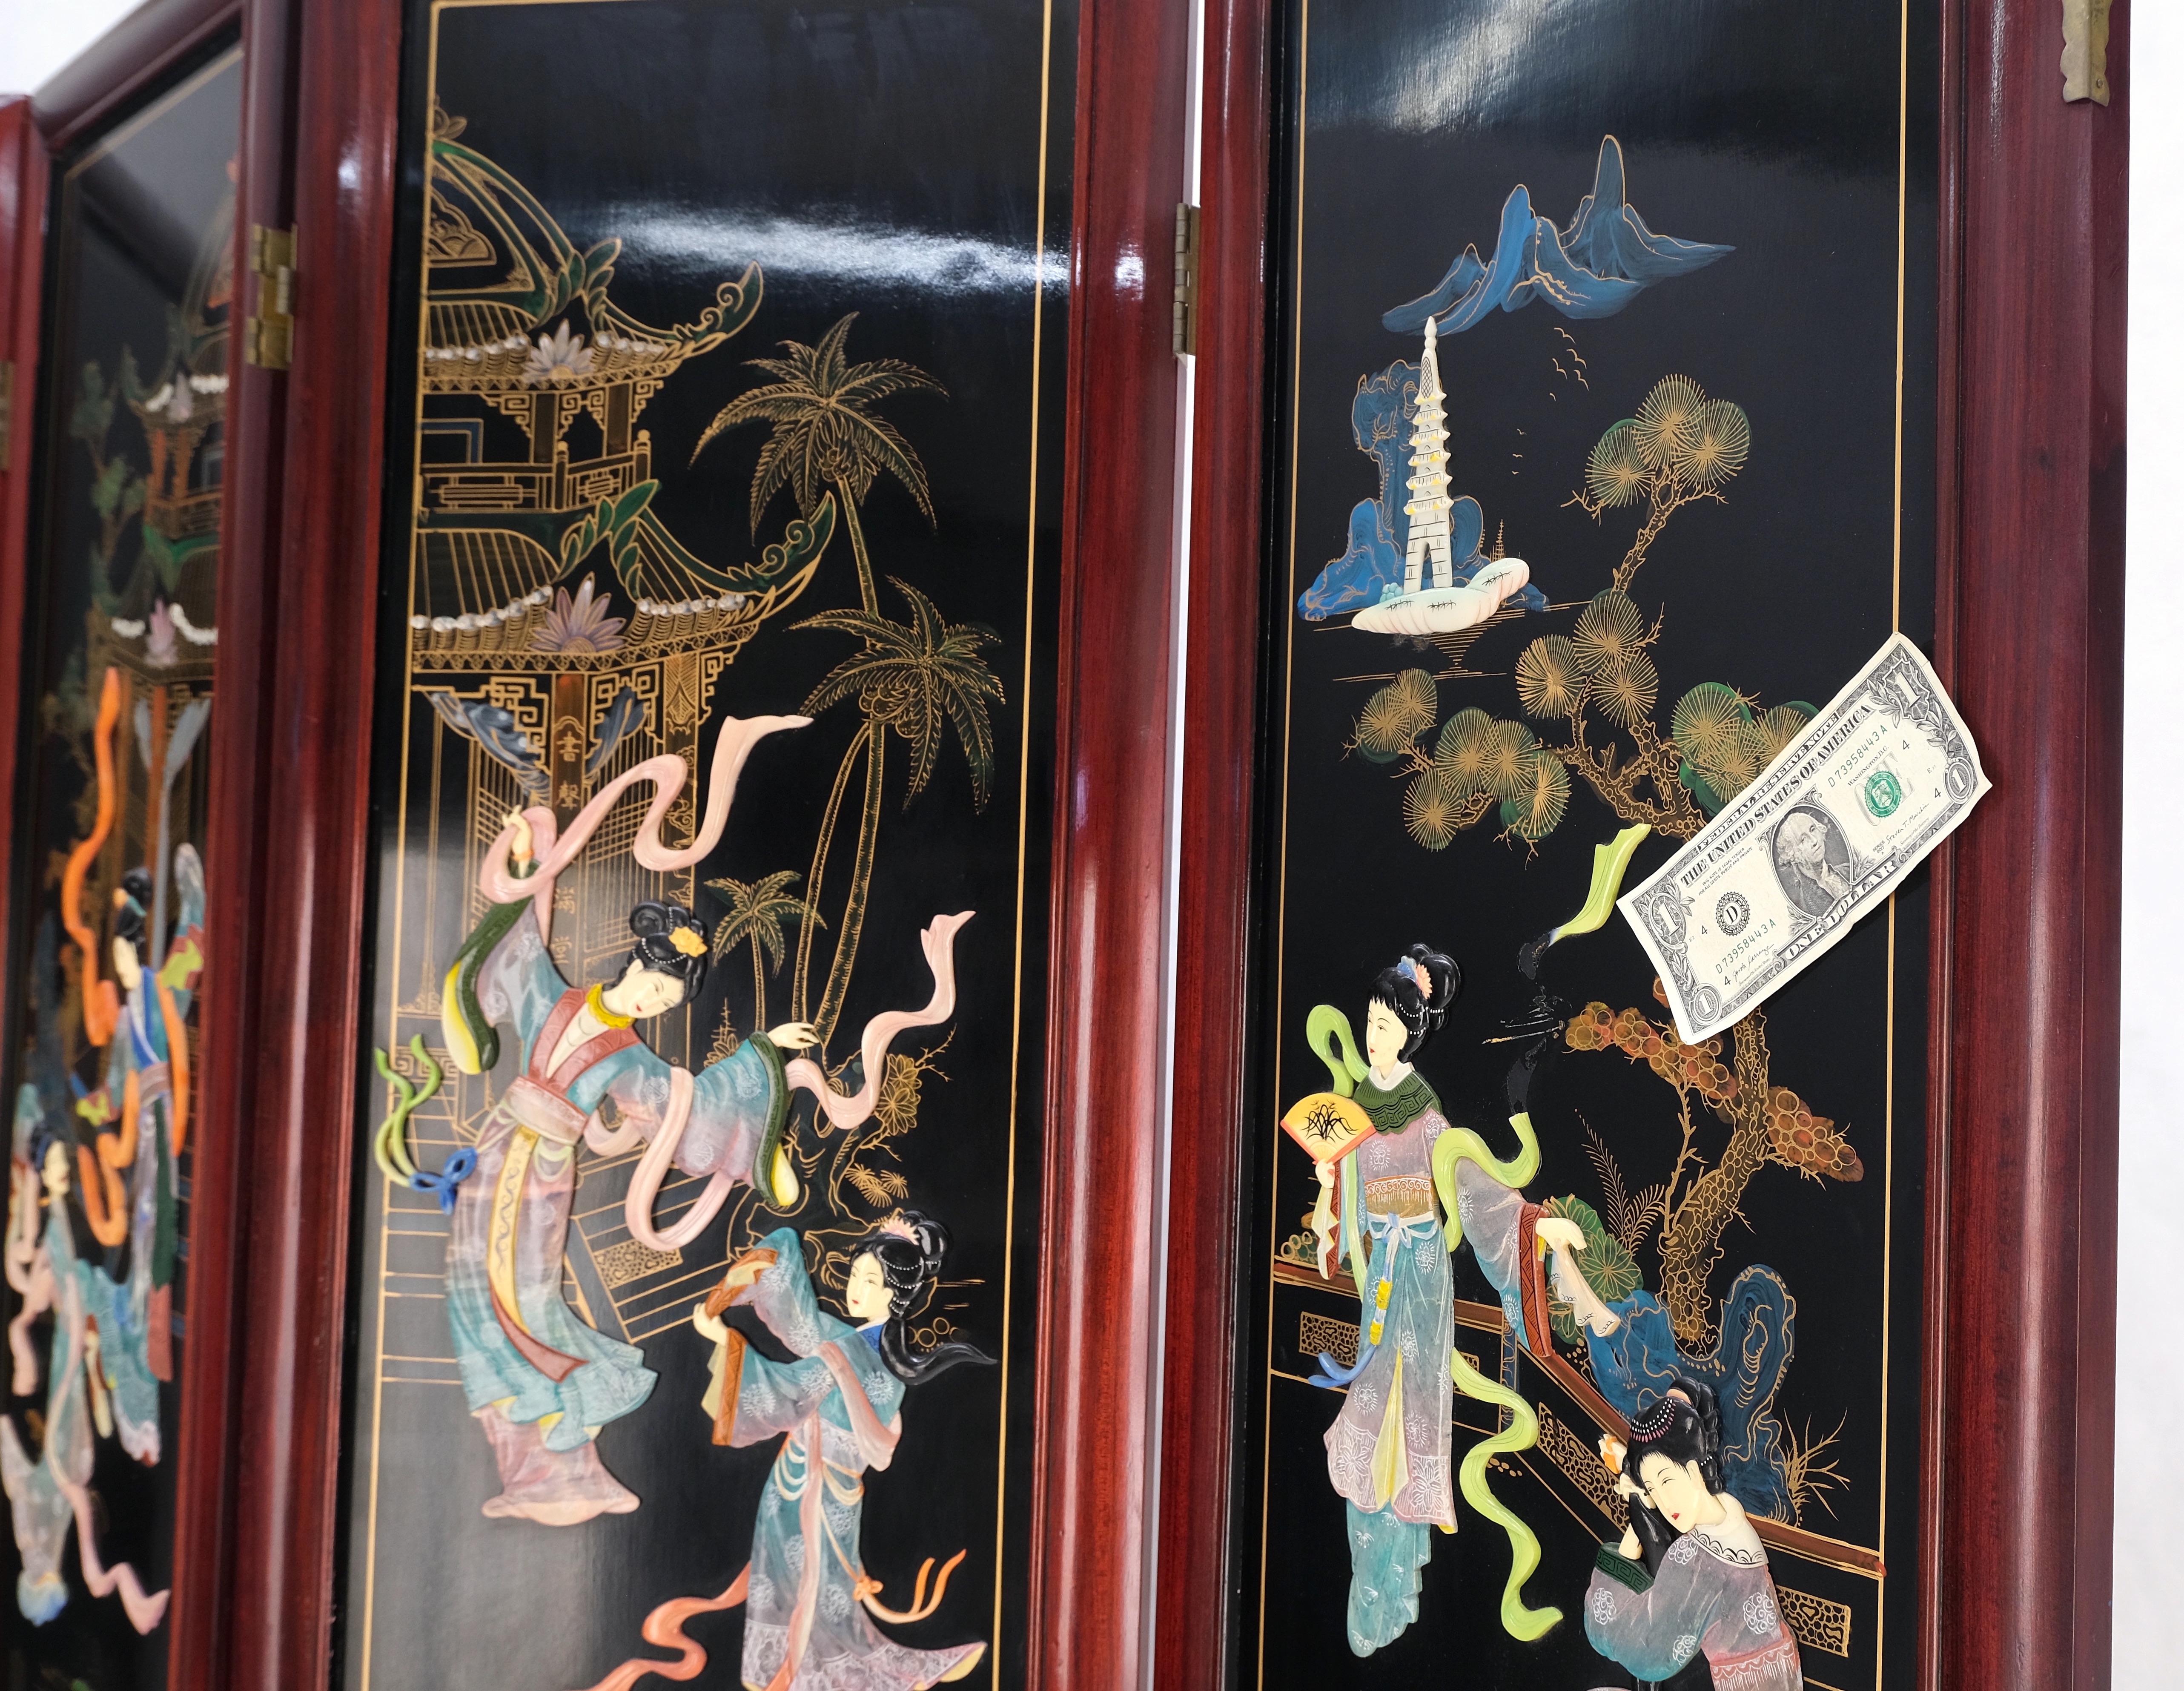 Lacquered Wood Mother of Pearl Chinese Oriental 4 Panel Room Divider Screen In Good Condition For Sale In Rockaway, NJ